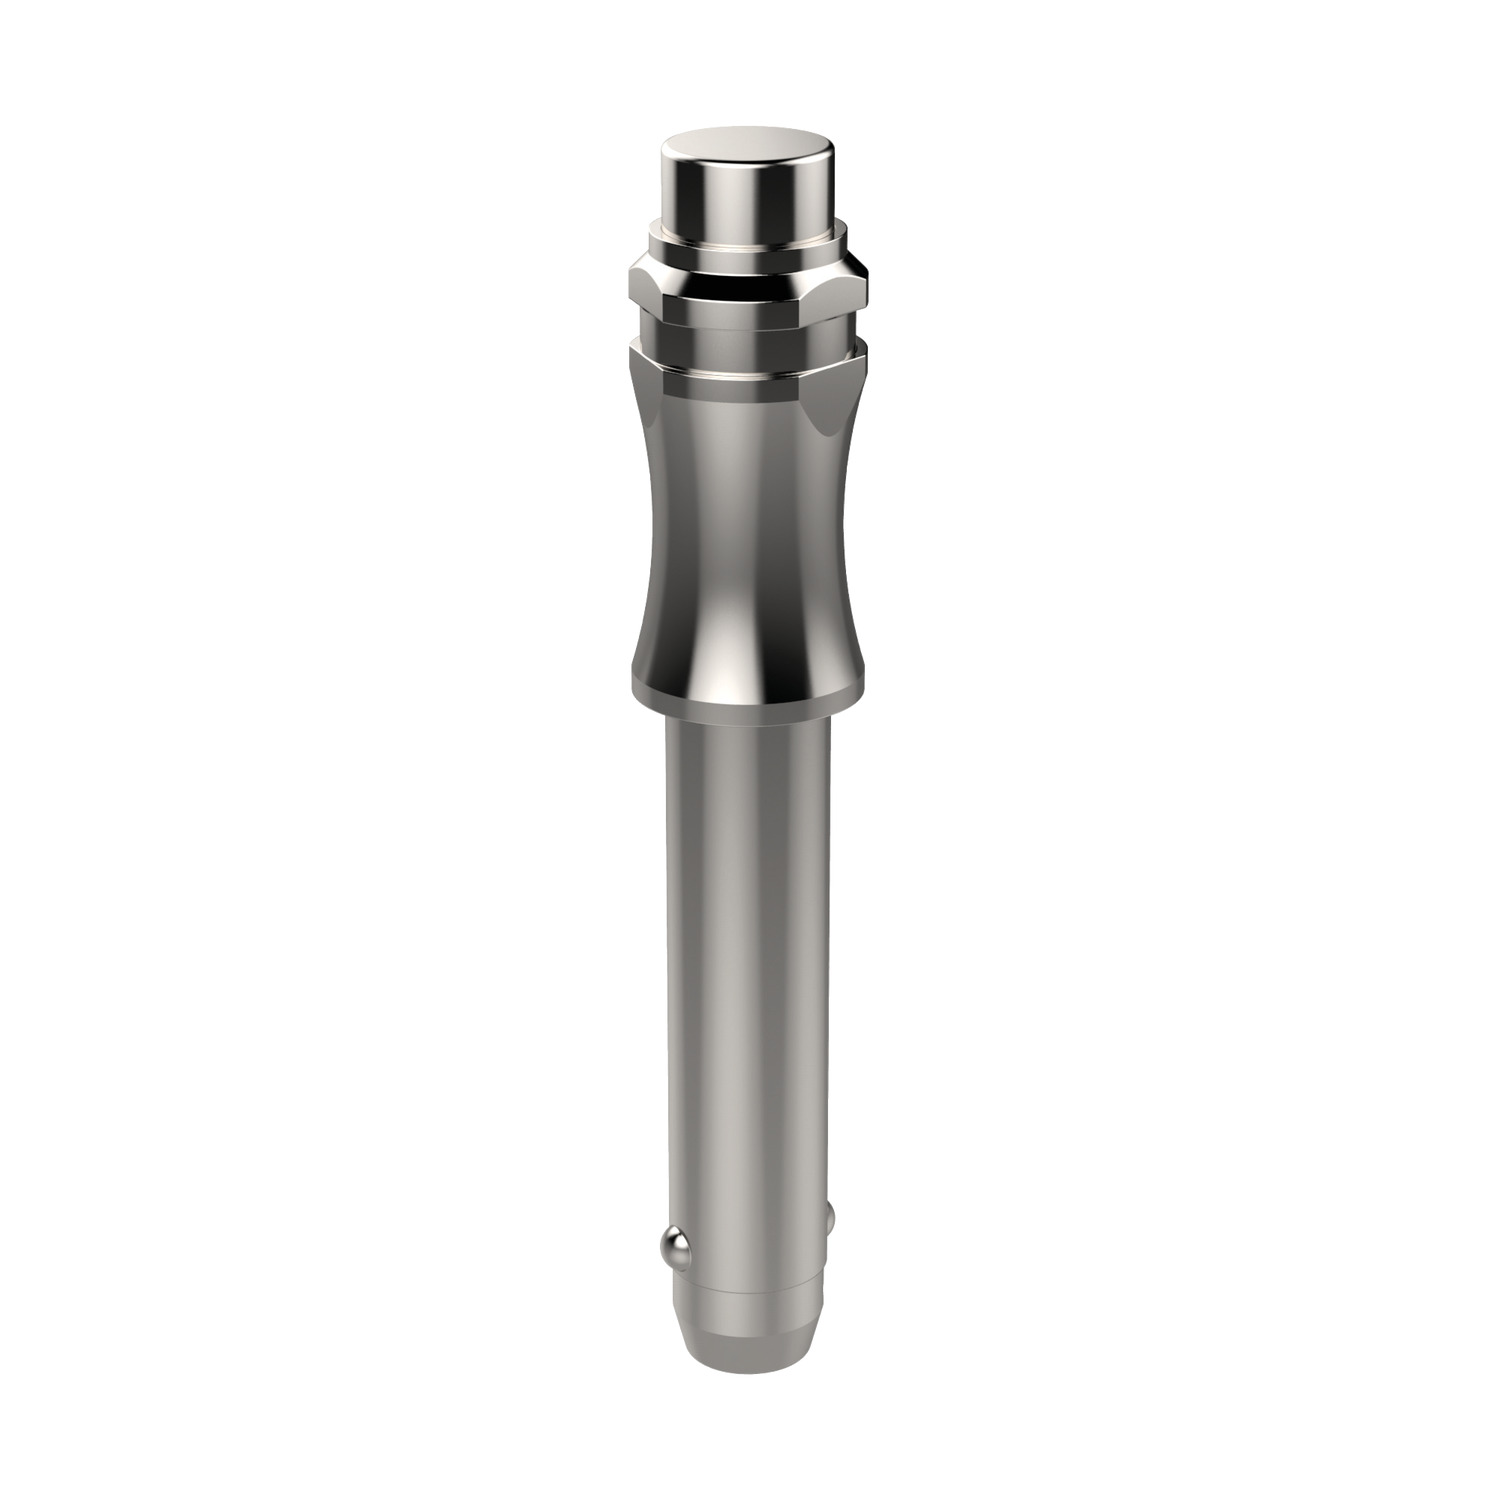 Ball Lock Pins - Contoured Handle These particular ball lock pins are specially designed from a single piece of material to minimise the danger of parts coming away from the pin. Available in stainless steel (AISI 303 and 630) and the more expensive titanium (product 33196).